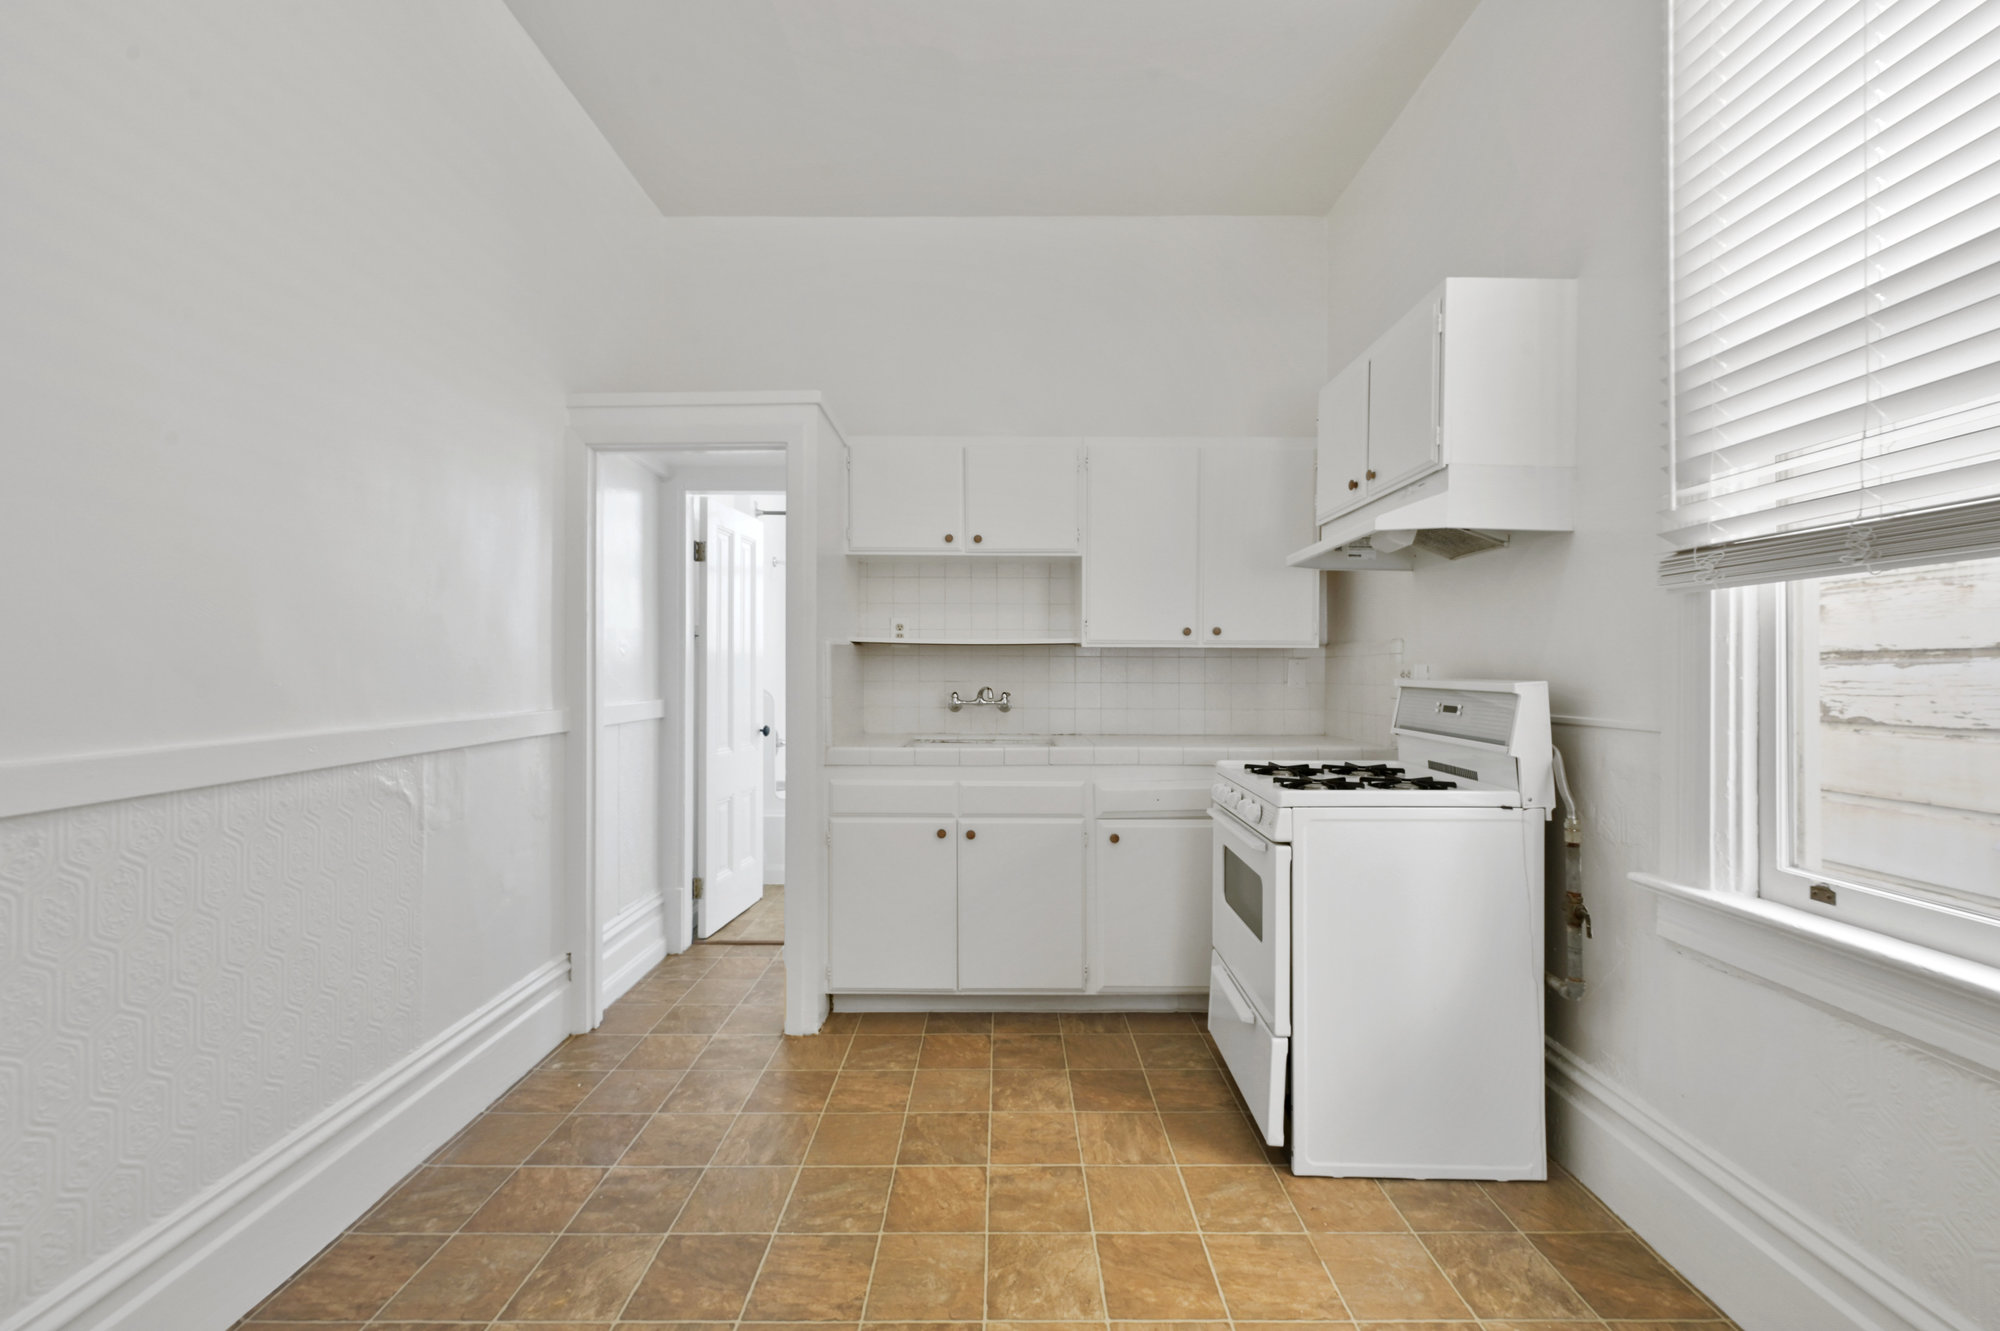 Property Photo: Kitchen with white cabinets, showing a stove and window